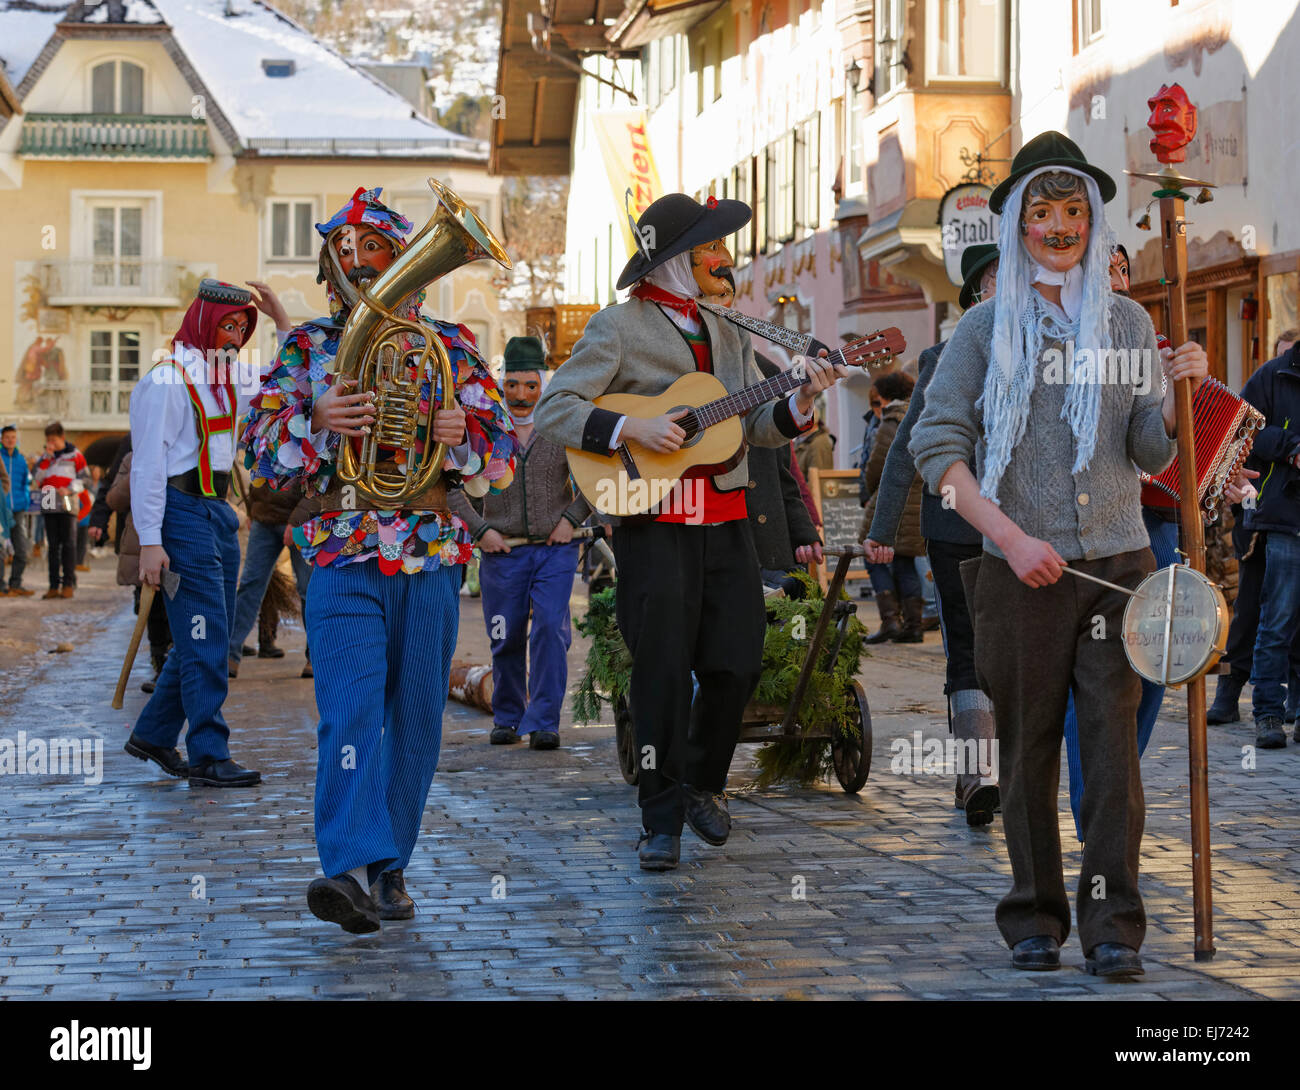 Fasching carnival with musicians and Maschkera, Mittenwald, Werdenfelser Land, Upper Bavaria, Bavaria, Germany Stock Photo